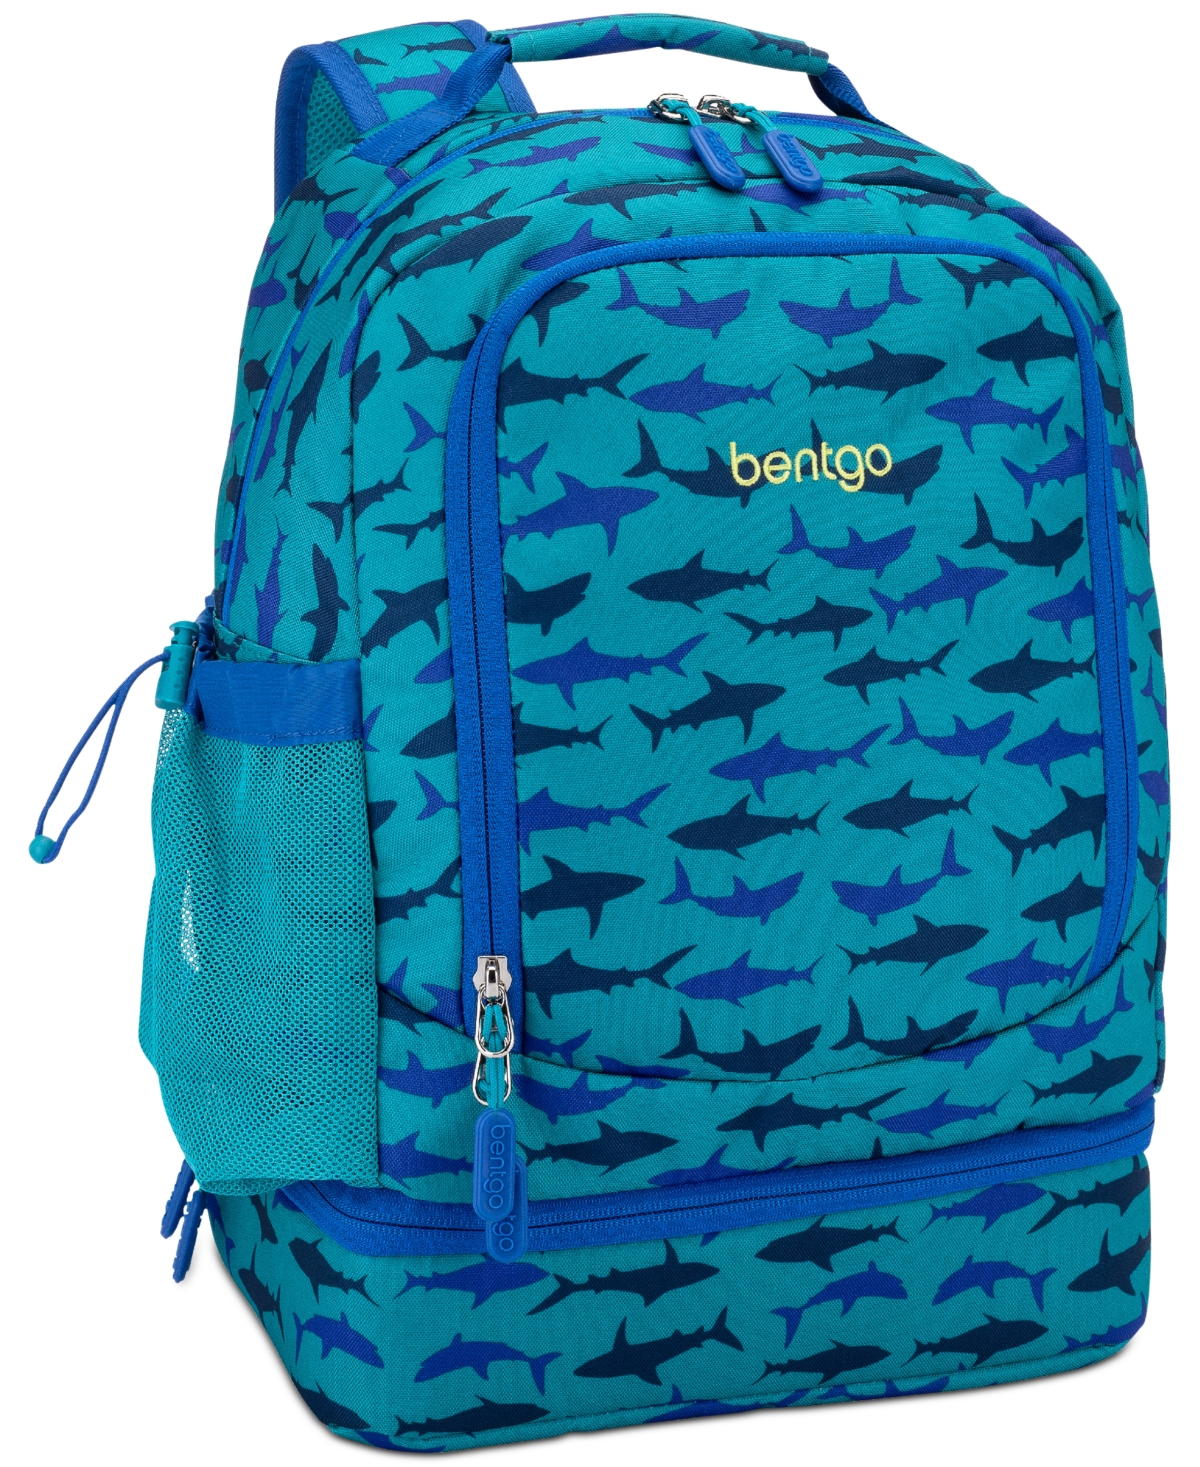 2-in-1 Backpack & Insulated Lunch Bag - Shark - Multi